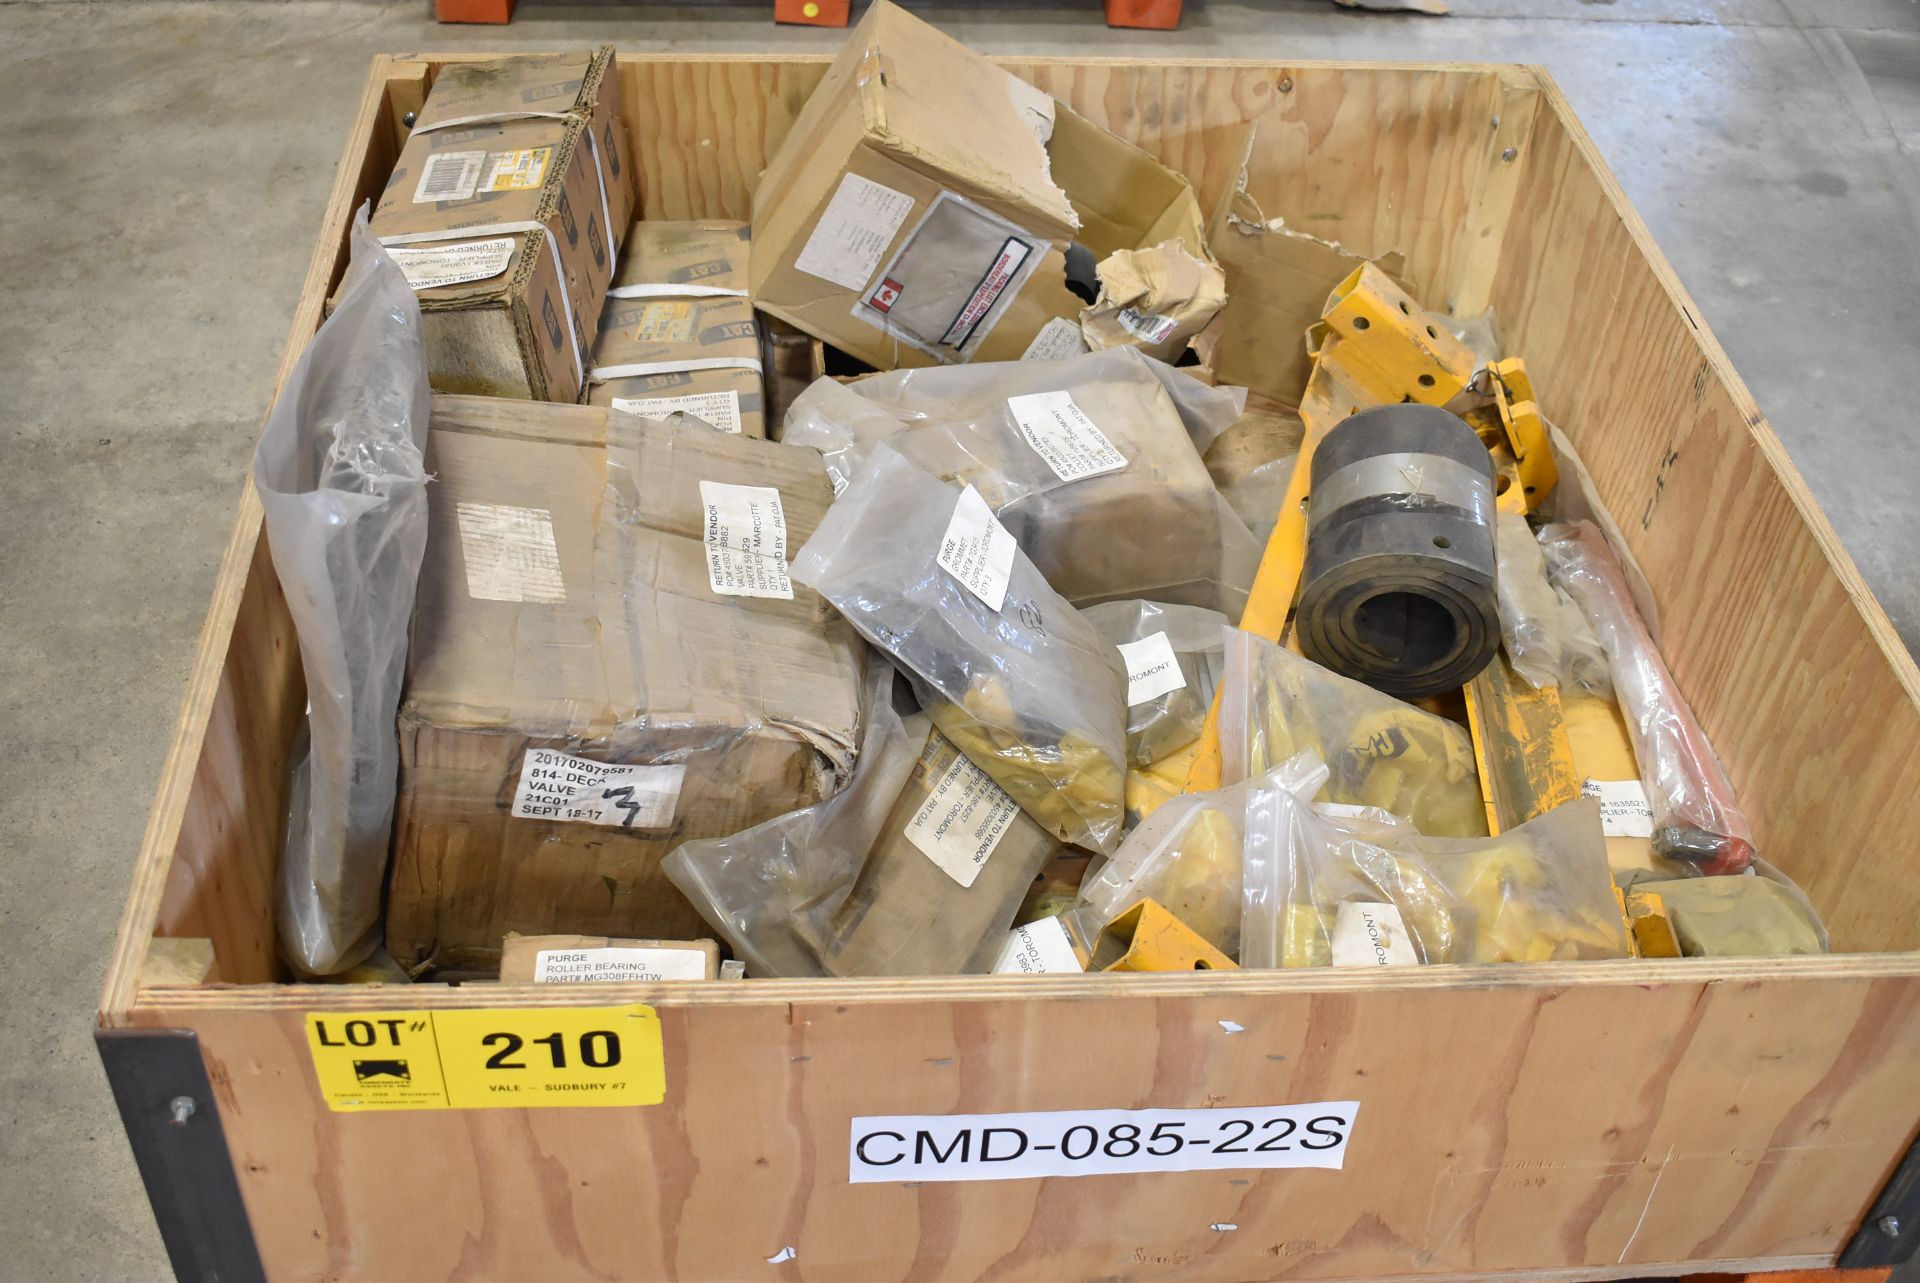 LOT/ SKID WITH CATERPILLAR PARTS - INCLUDING CLAMPS, COLLETS, SHIMS, GROMMETS, VALVES, BRACKETS,